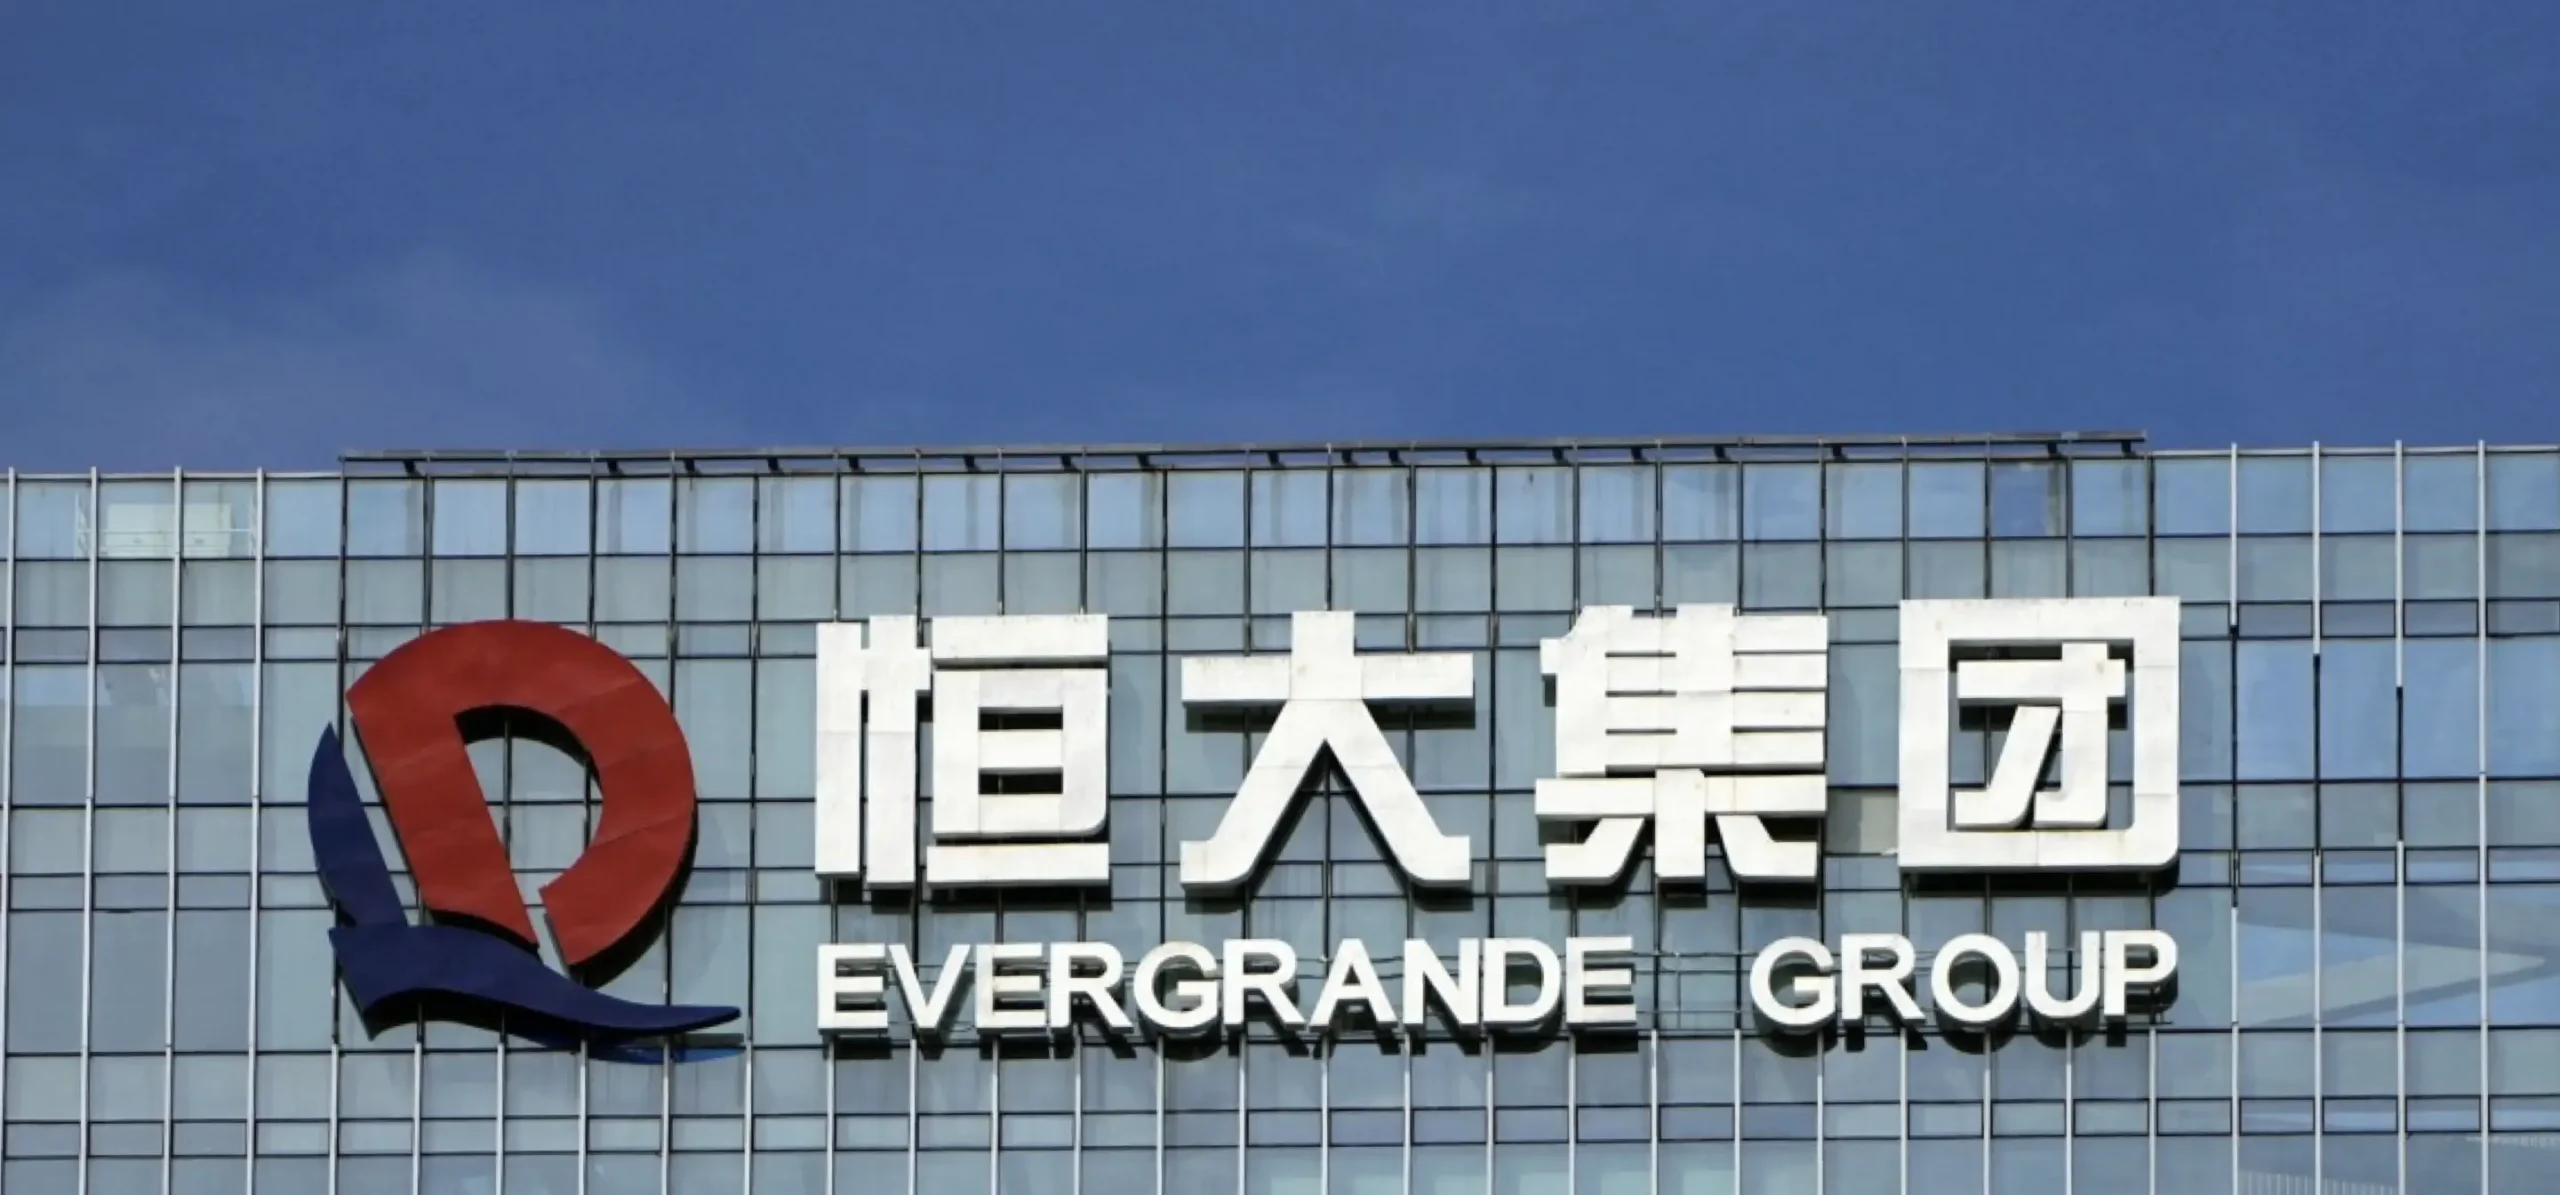 Amid real estate crisis, China Evergrande files for protection in US bankruptcy court